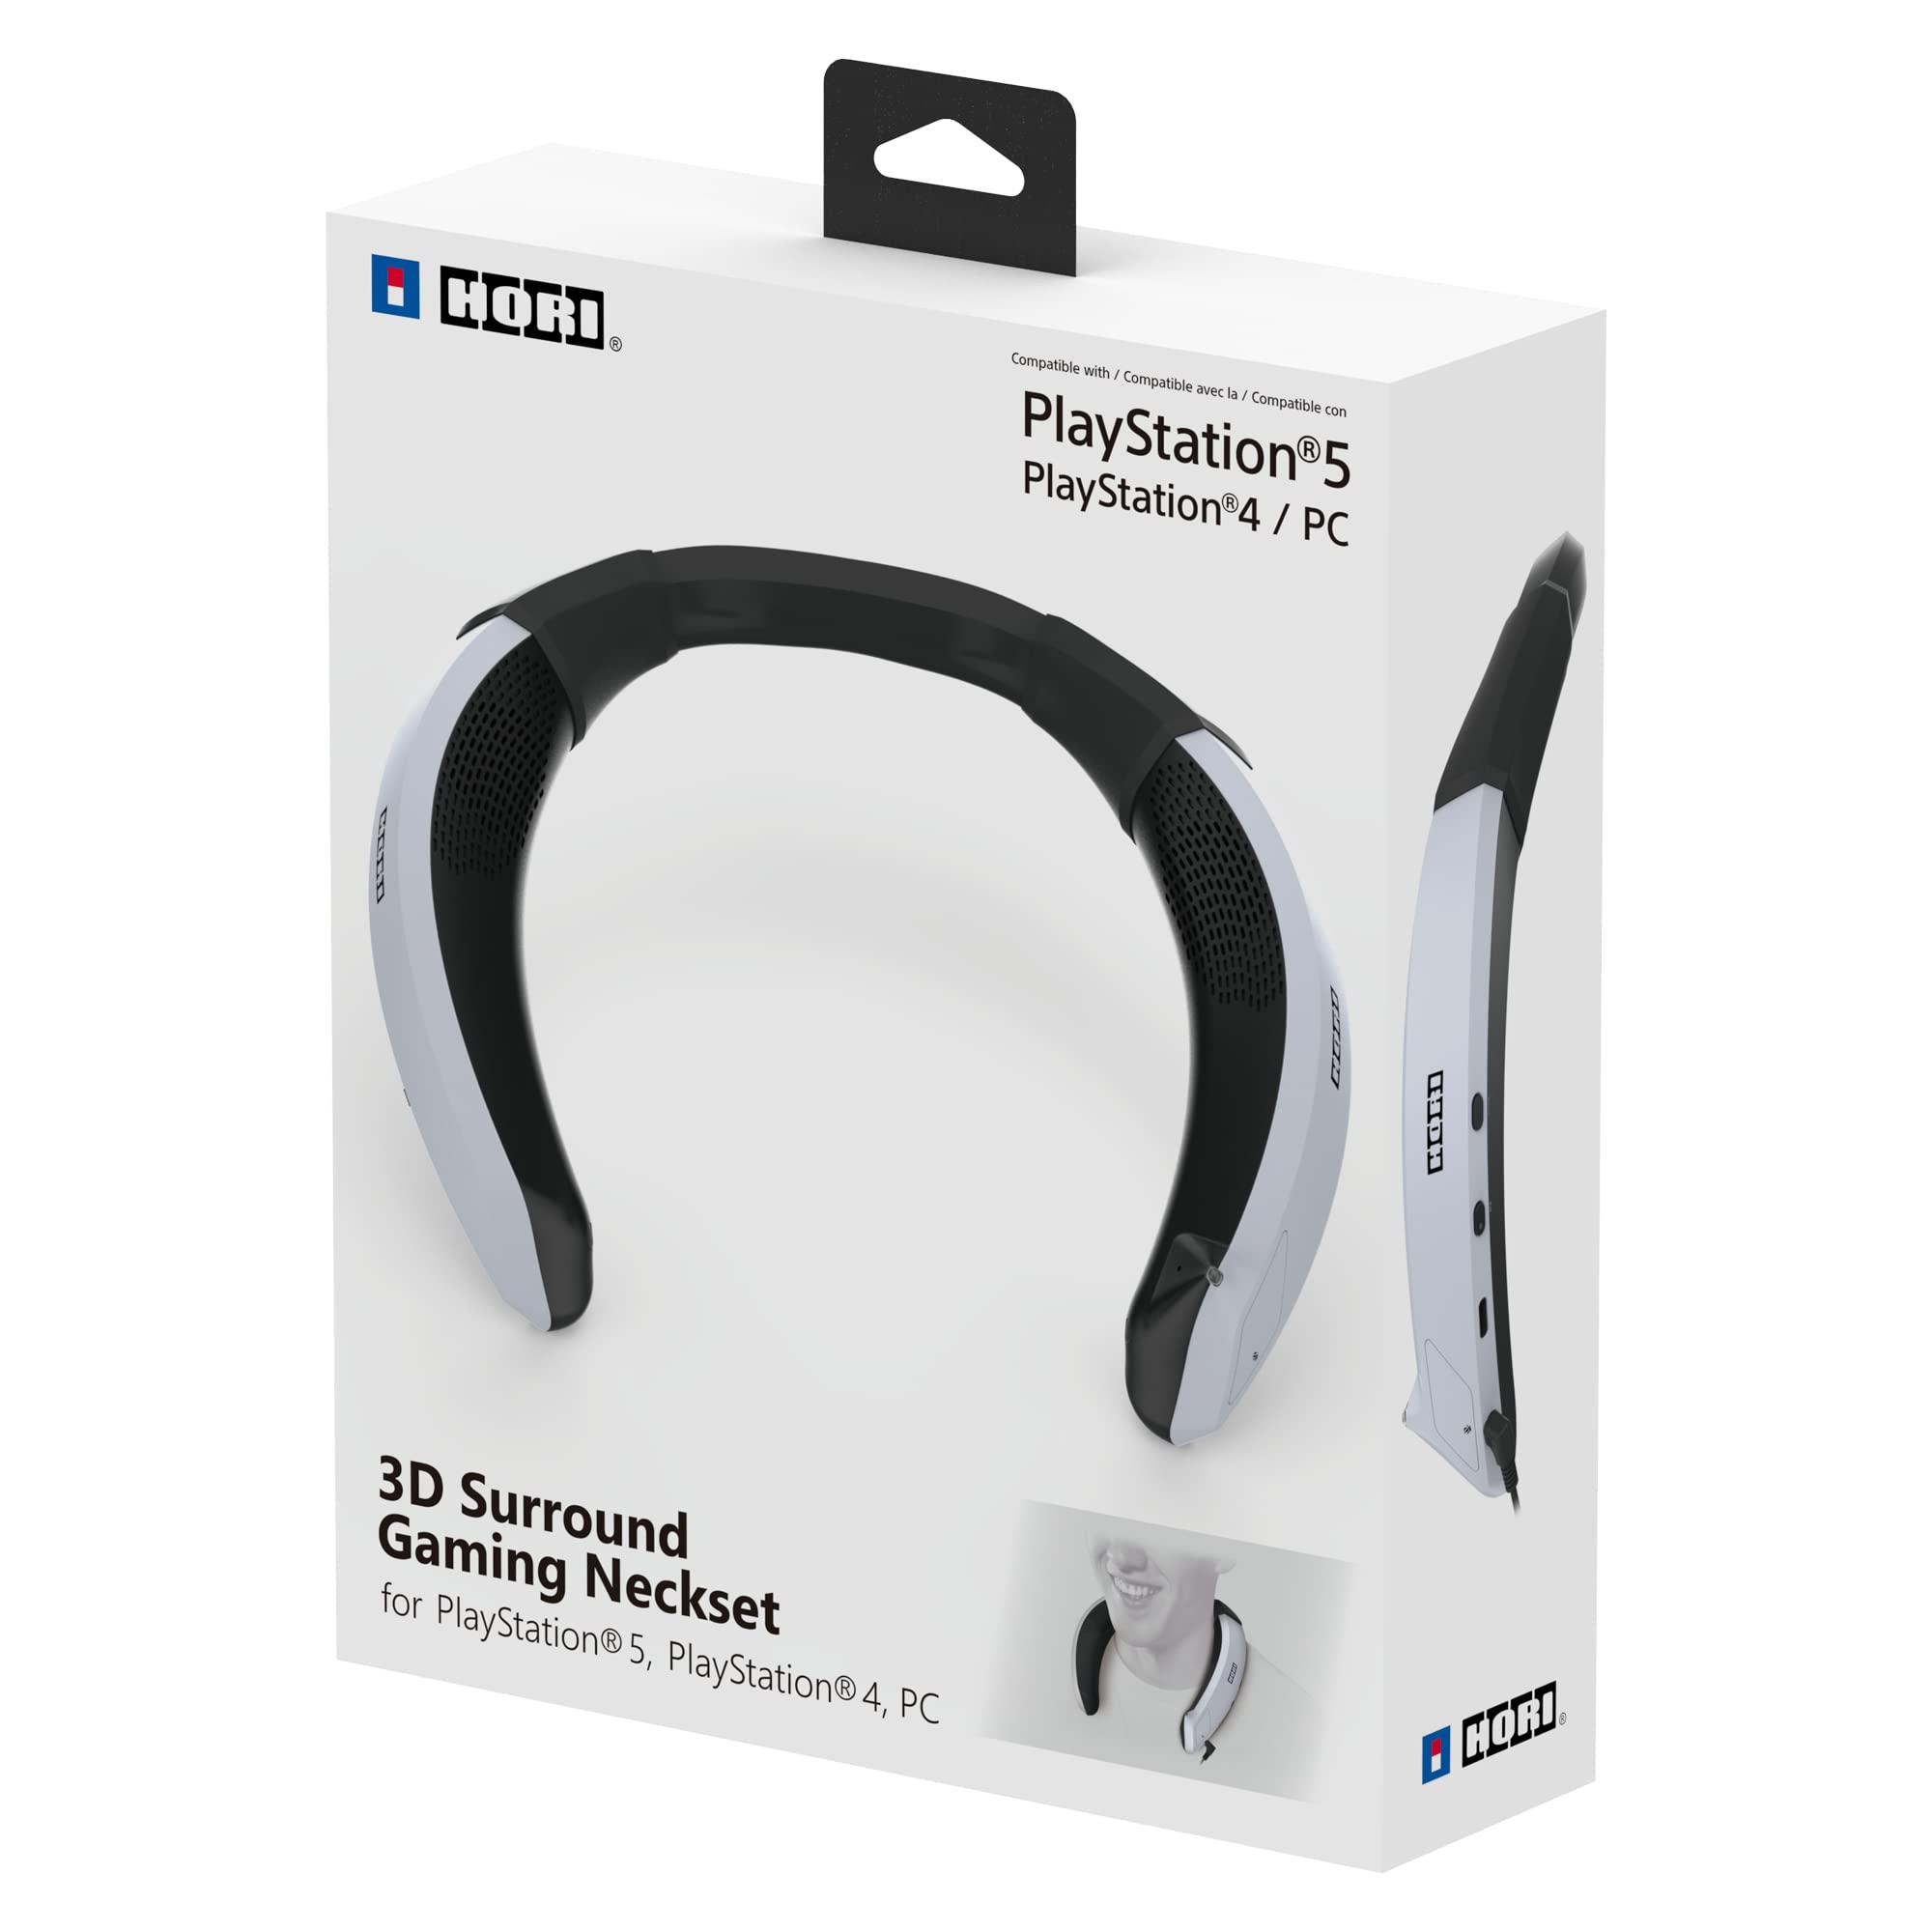 HORI 3D Surround Gaming Neckset - Wired Wearable Speaker for PS5, PS4, PC - Playstation 5